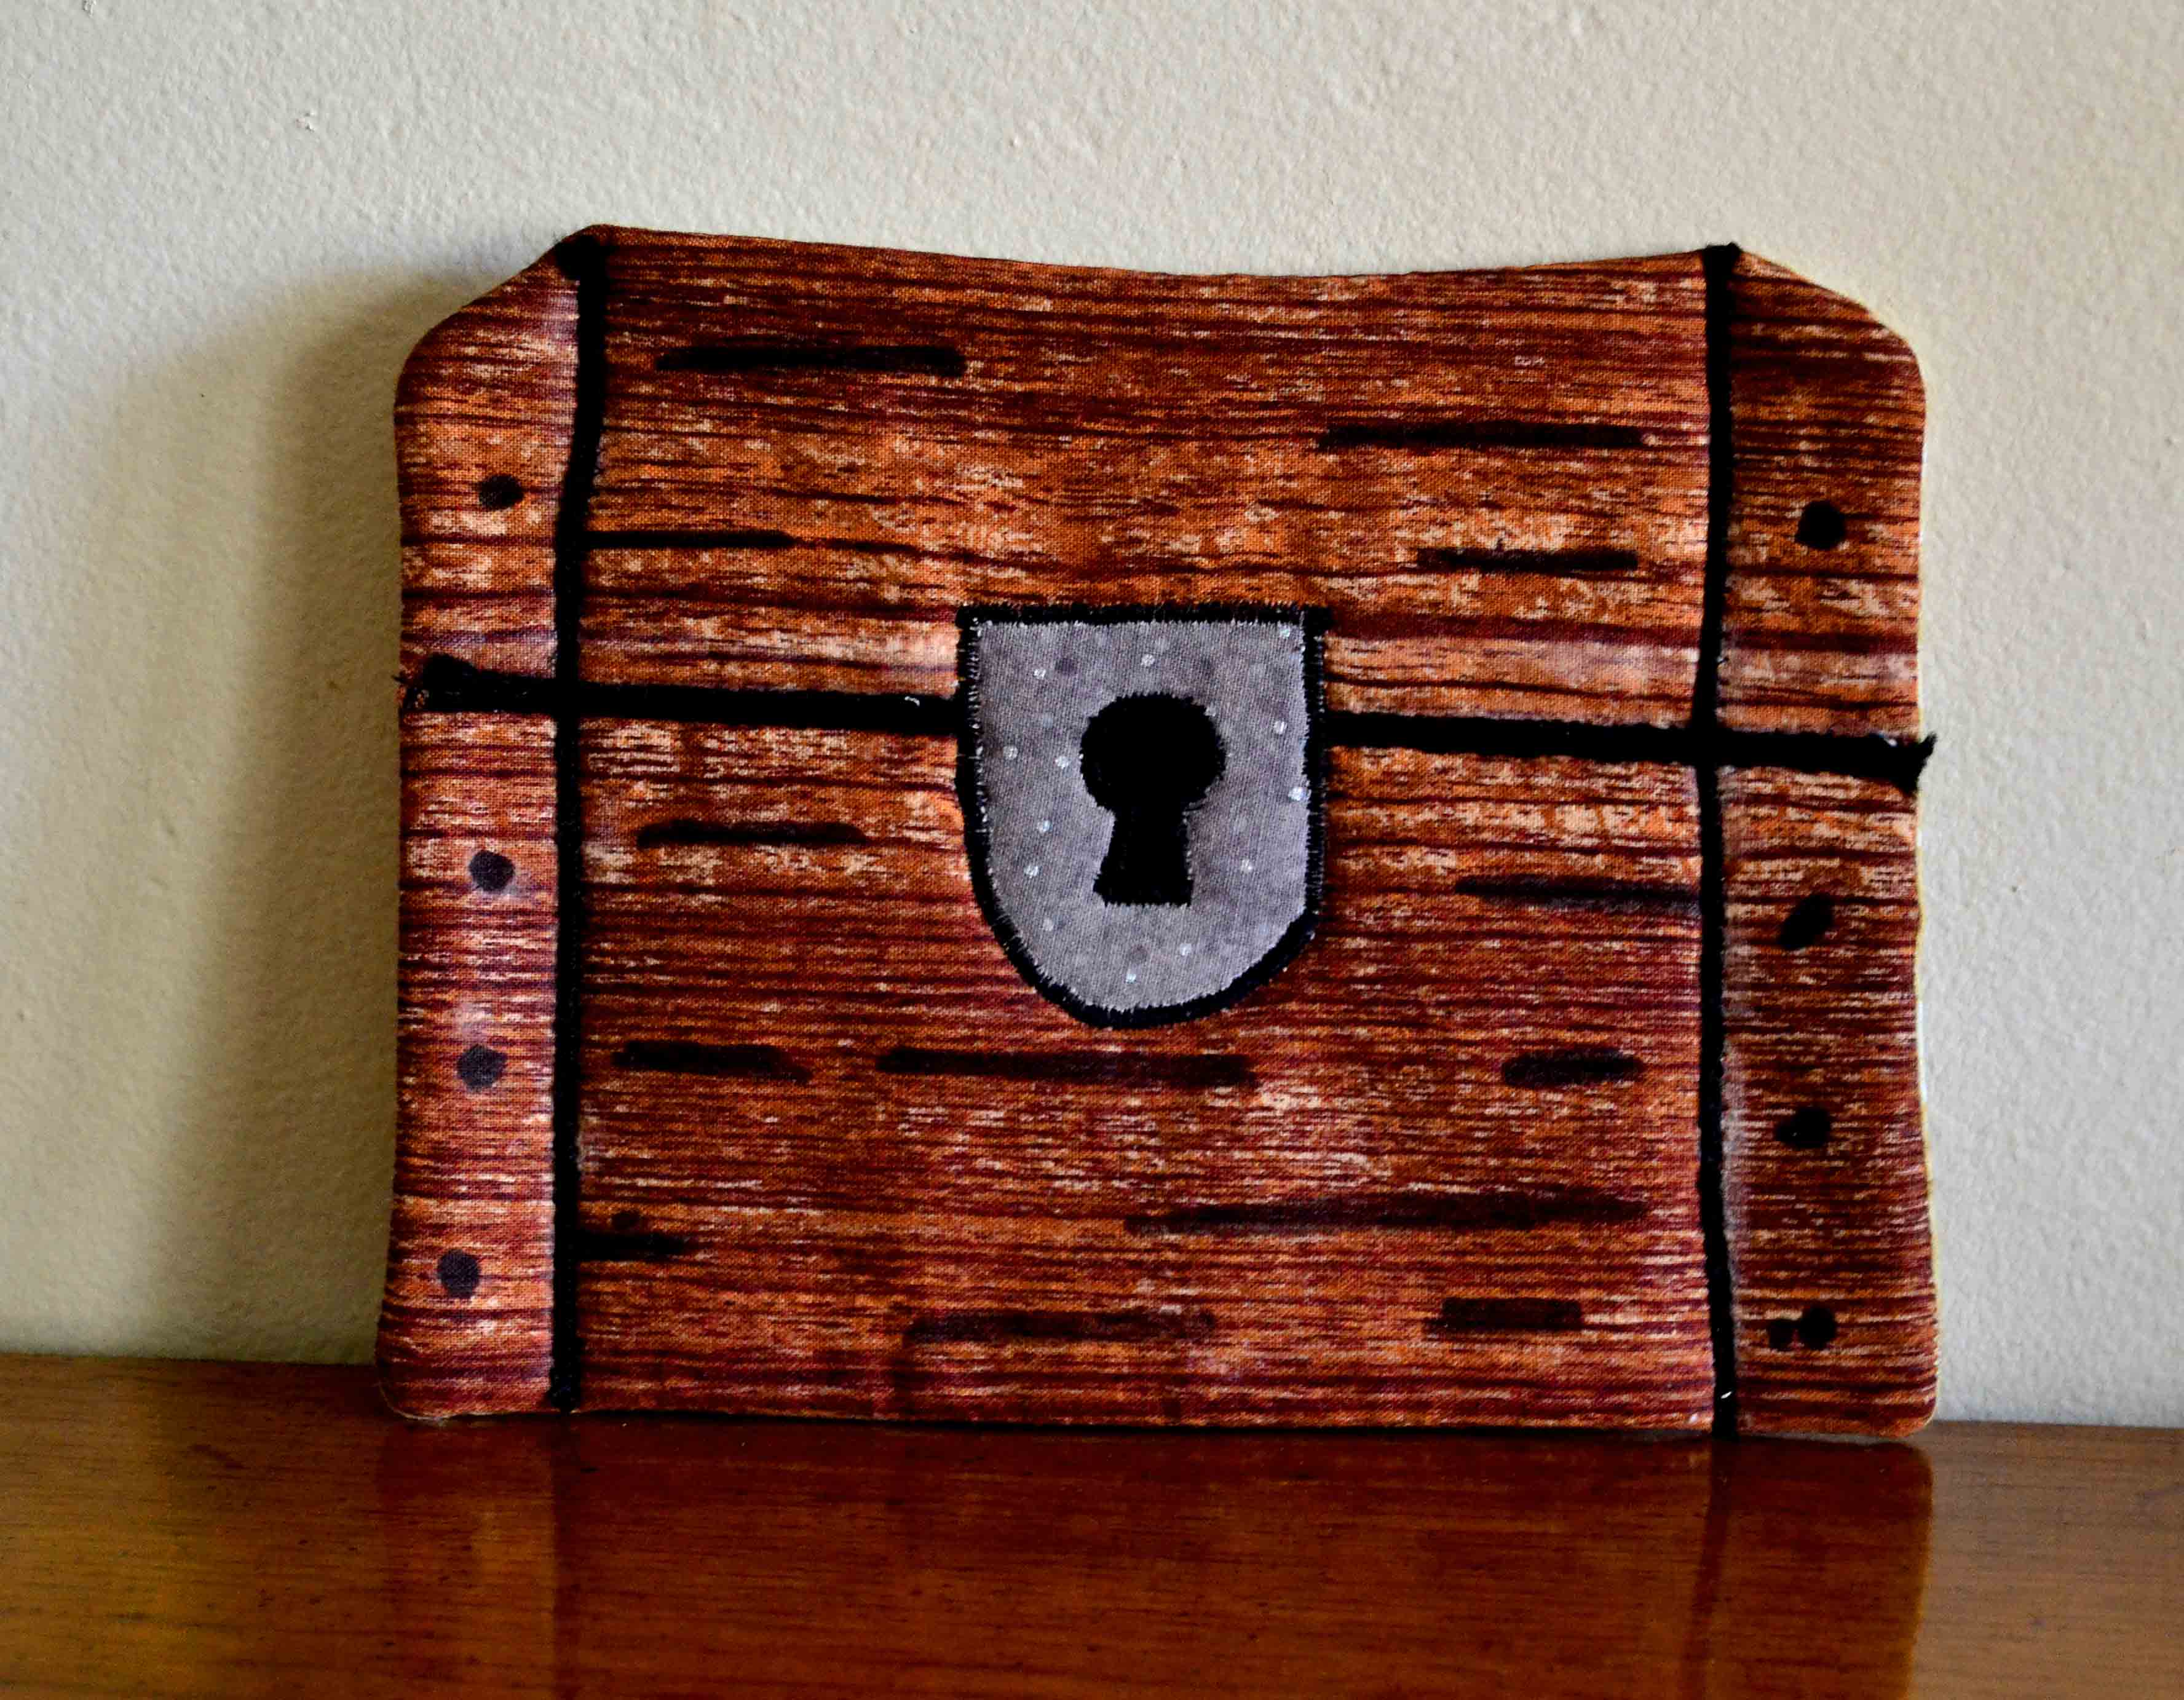 Treasure chest 1-hour, 1-of-a-kind shaped potholder